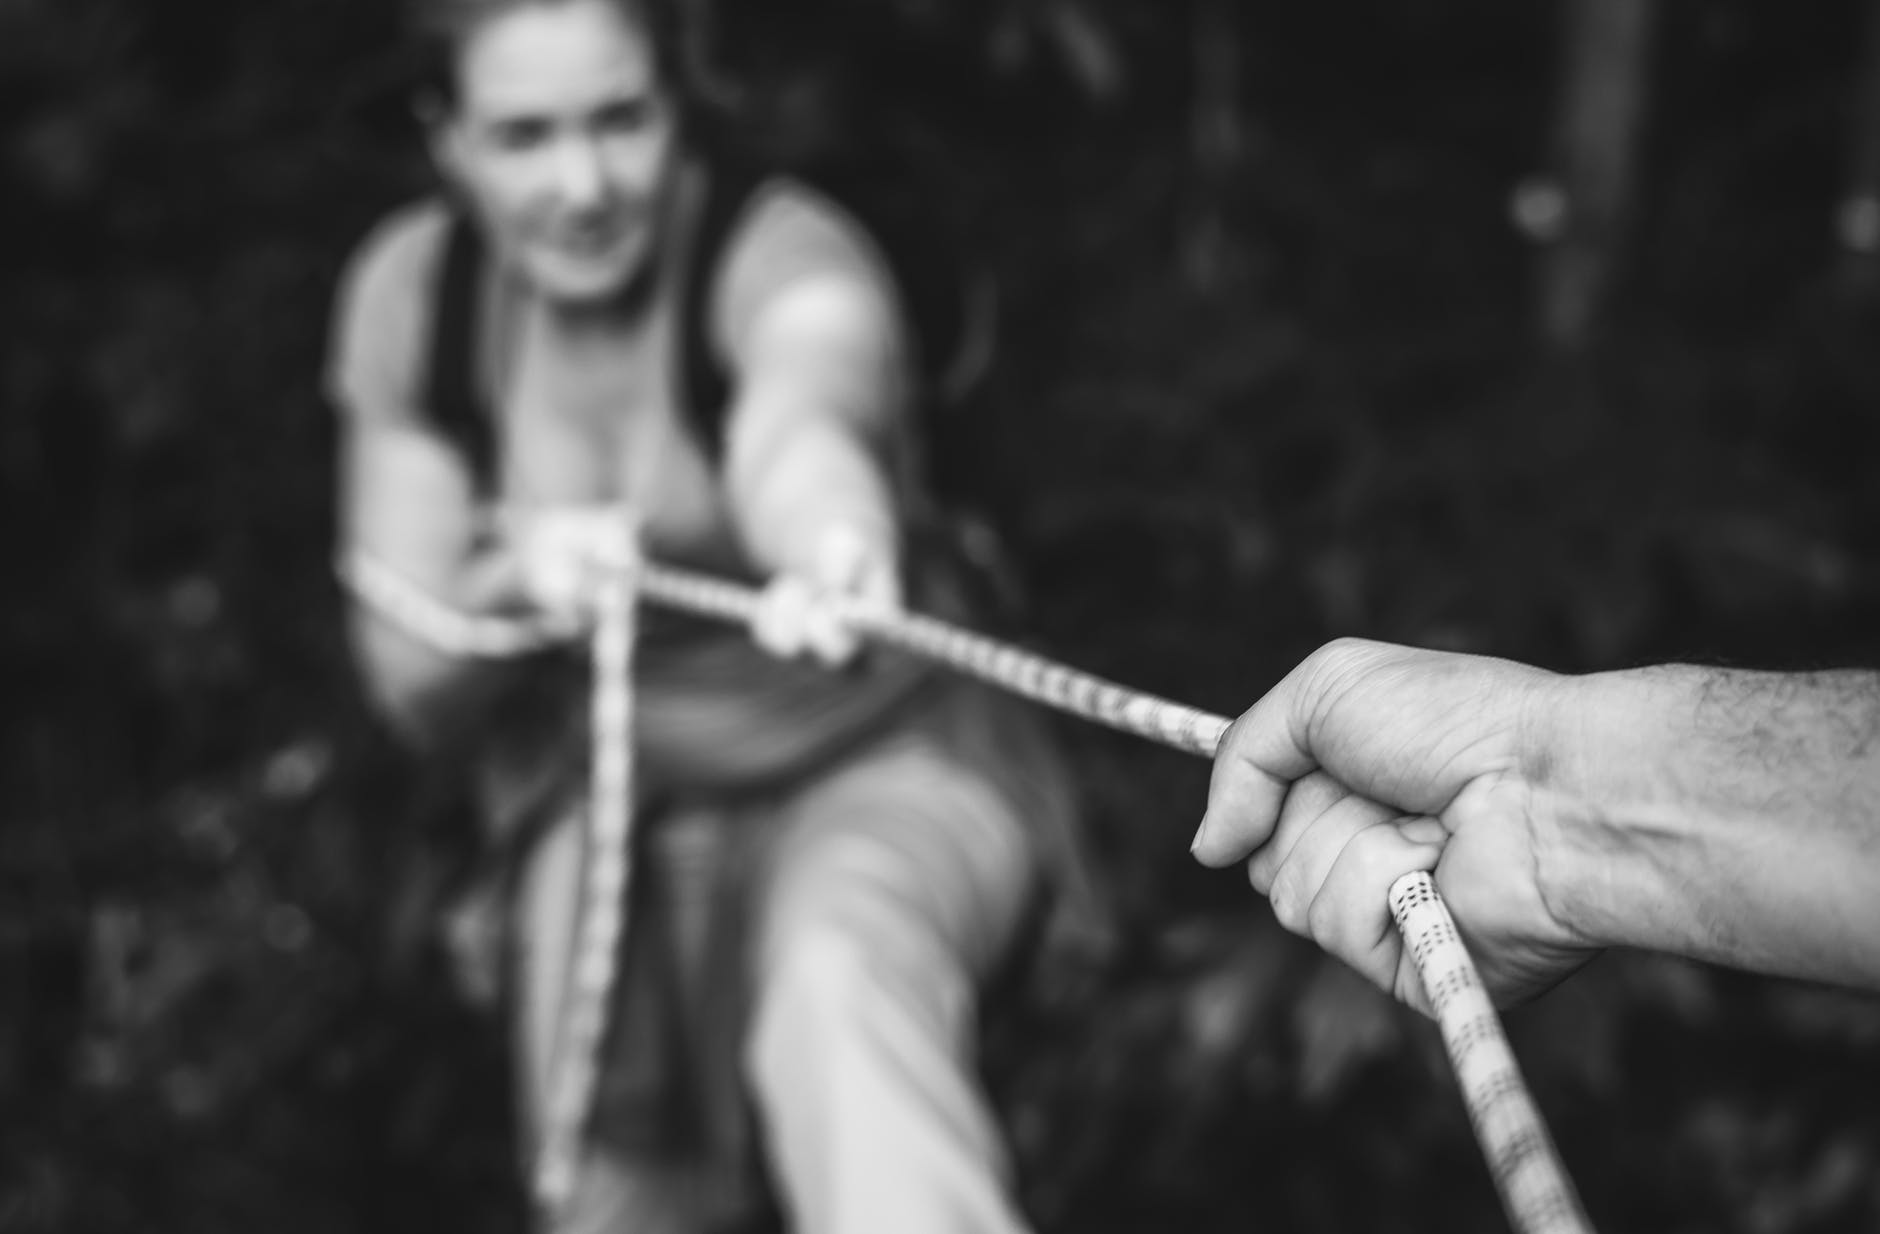 grayscale photo of person pulling up woman using rope